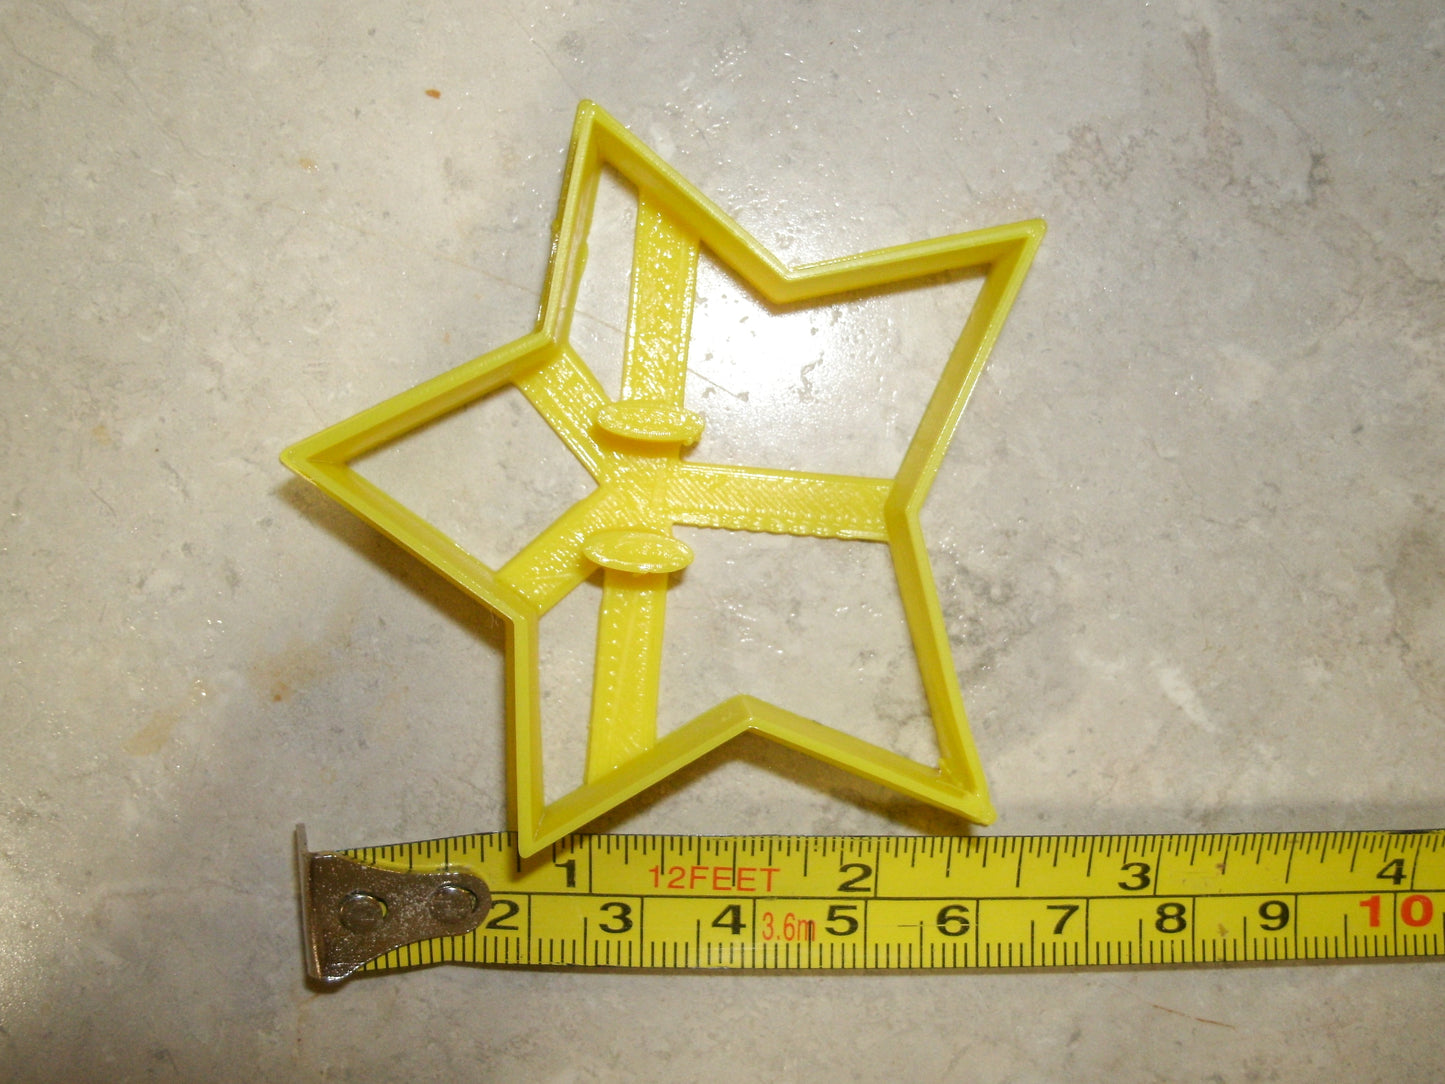 Super Mario Star Nintendo Video Game Character Cookie Cutter Made In USA PR2092